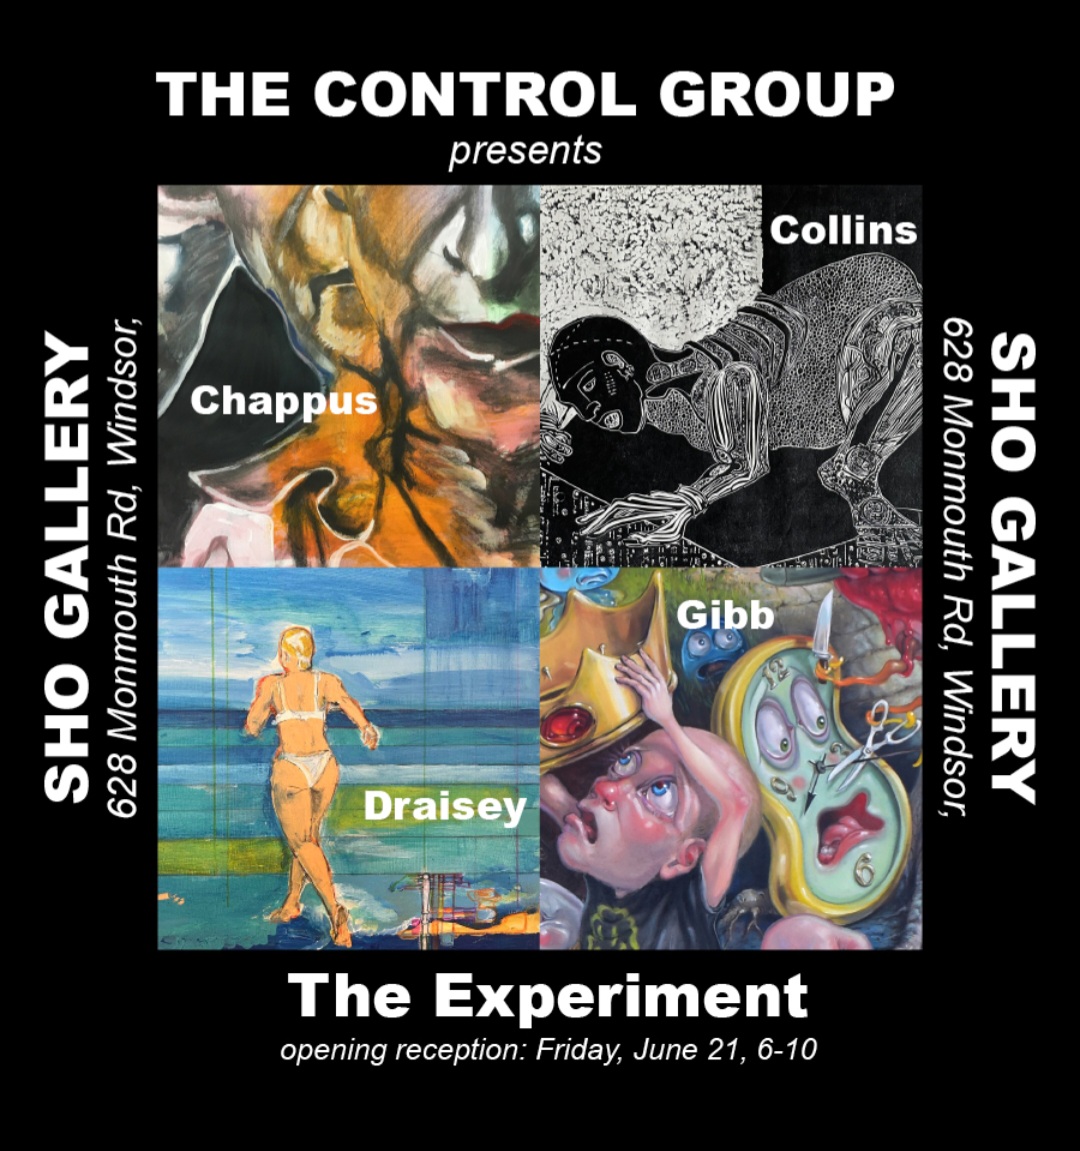 The Control Group presents The Experiment